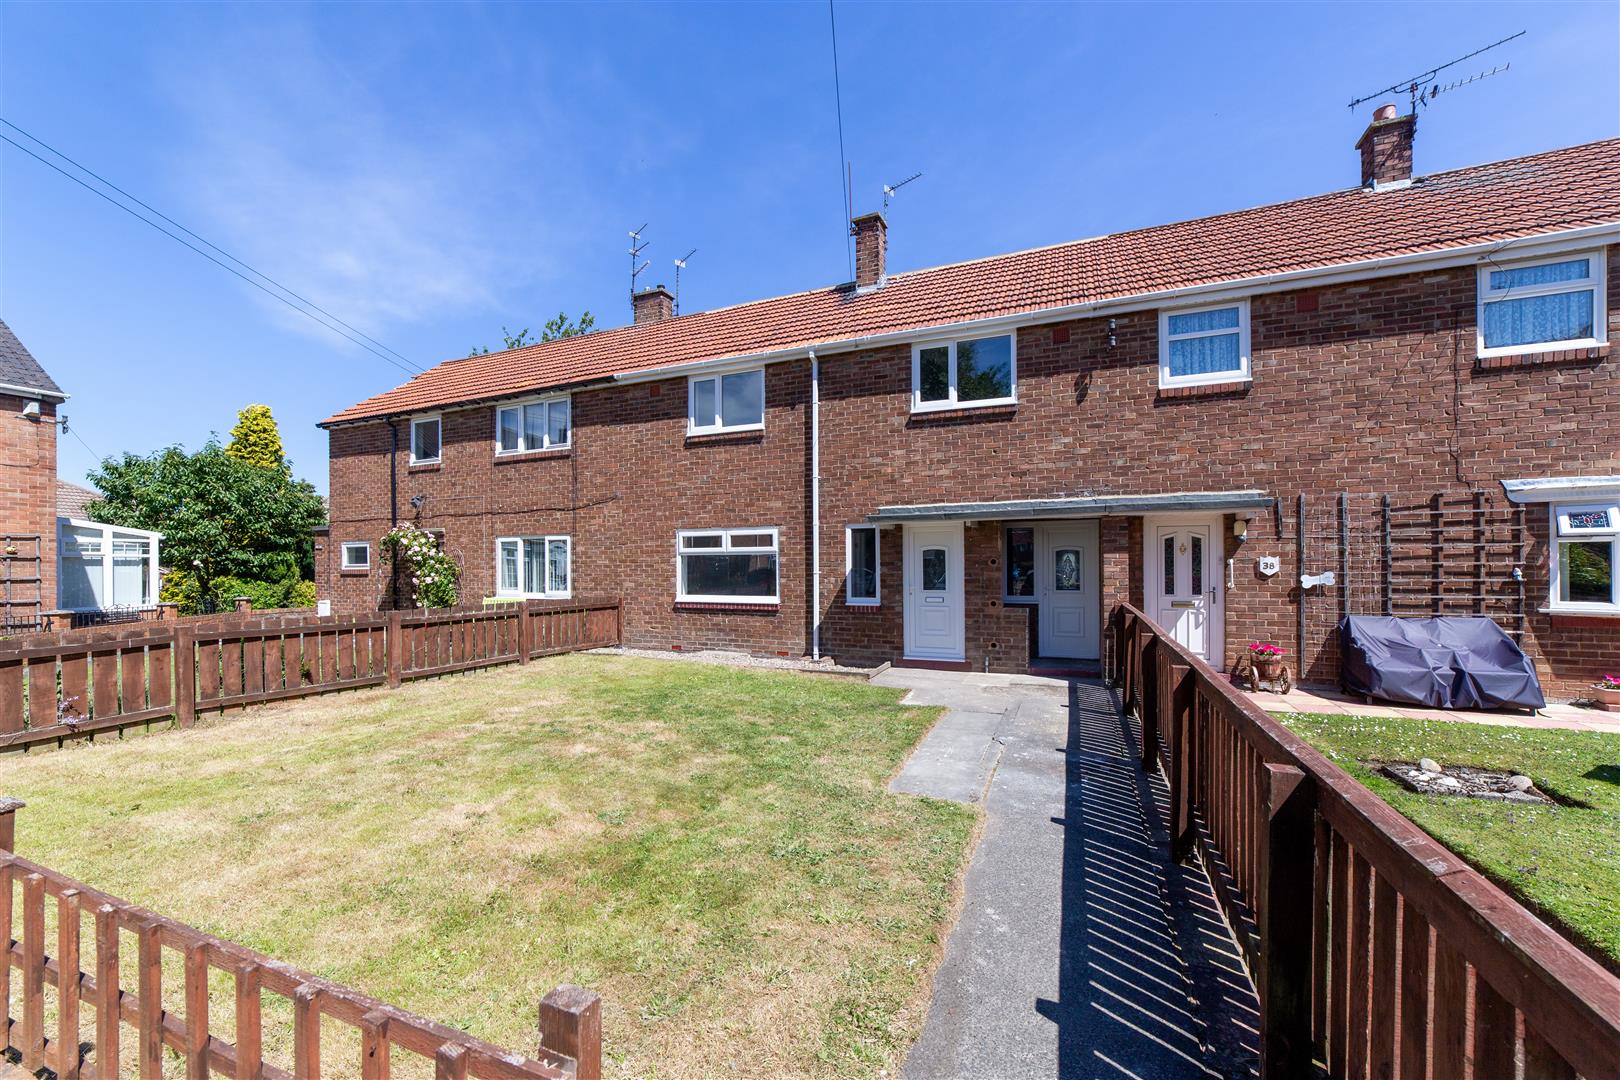 3 bed terraced house to rent in Beal Way, Gosforth, NE3 